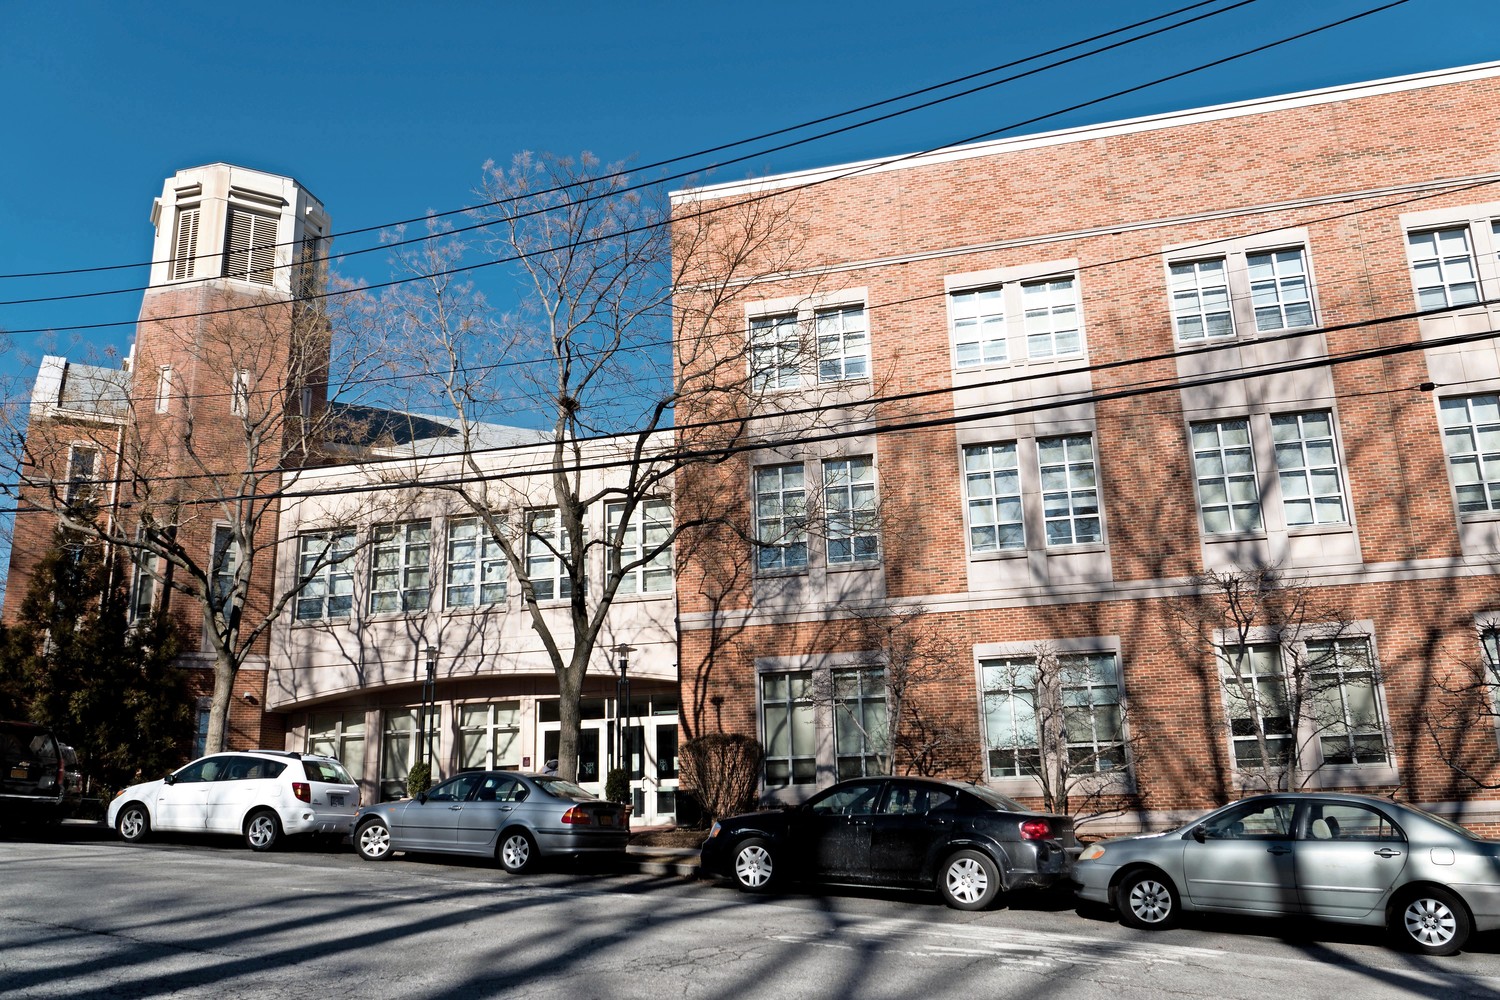 Horace Mann School joins Riverdale Country School and both SAR High School and SAR Academy as elite local schools that have shut their doors over coronavirus concerns.